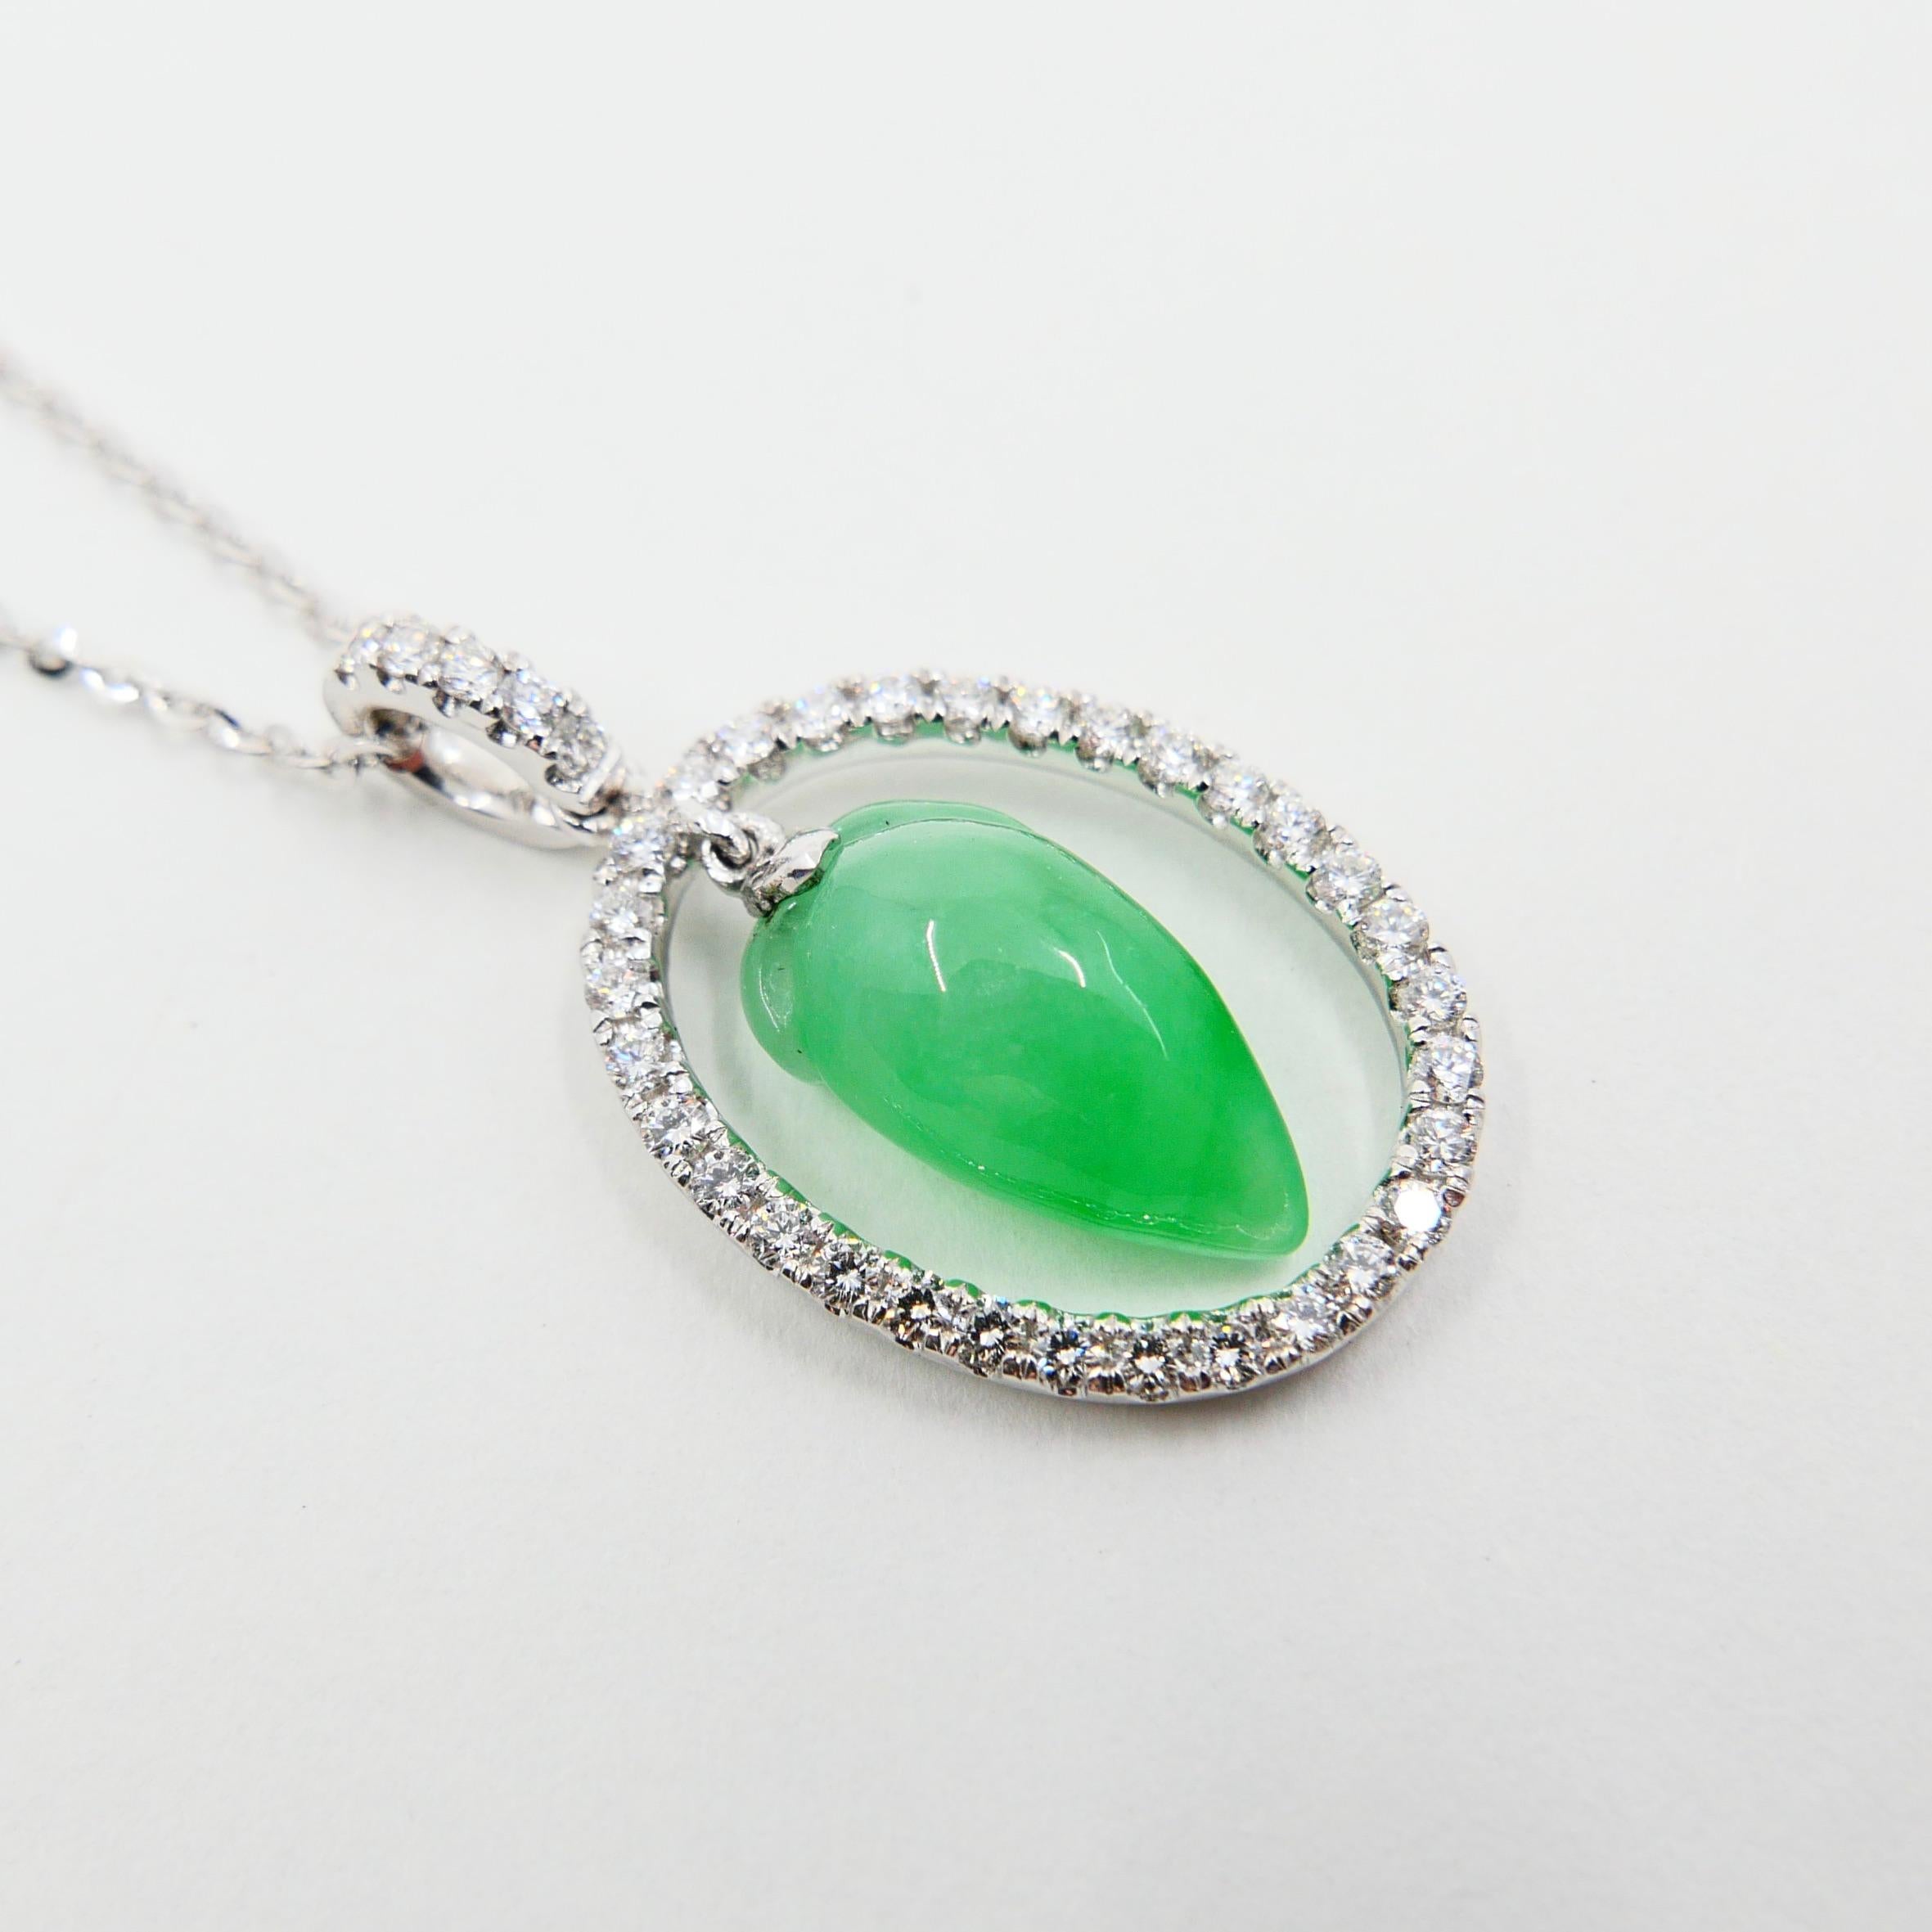 Rough Cut Certified Type A Icy Jade & Diamond Pendant, Apple Green Color, Translucent For Sale